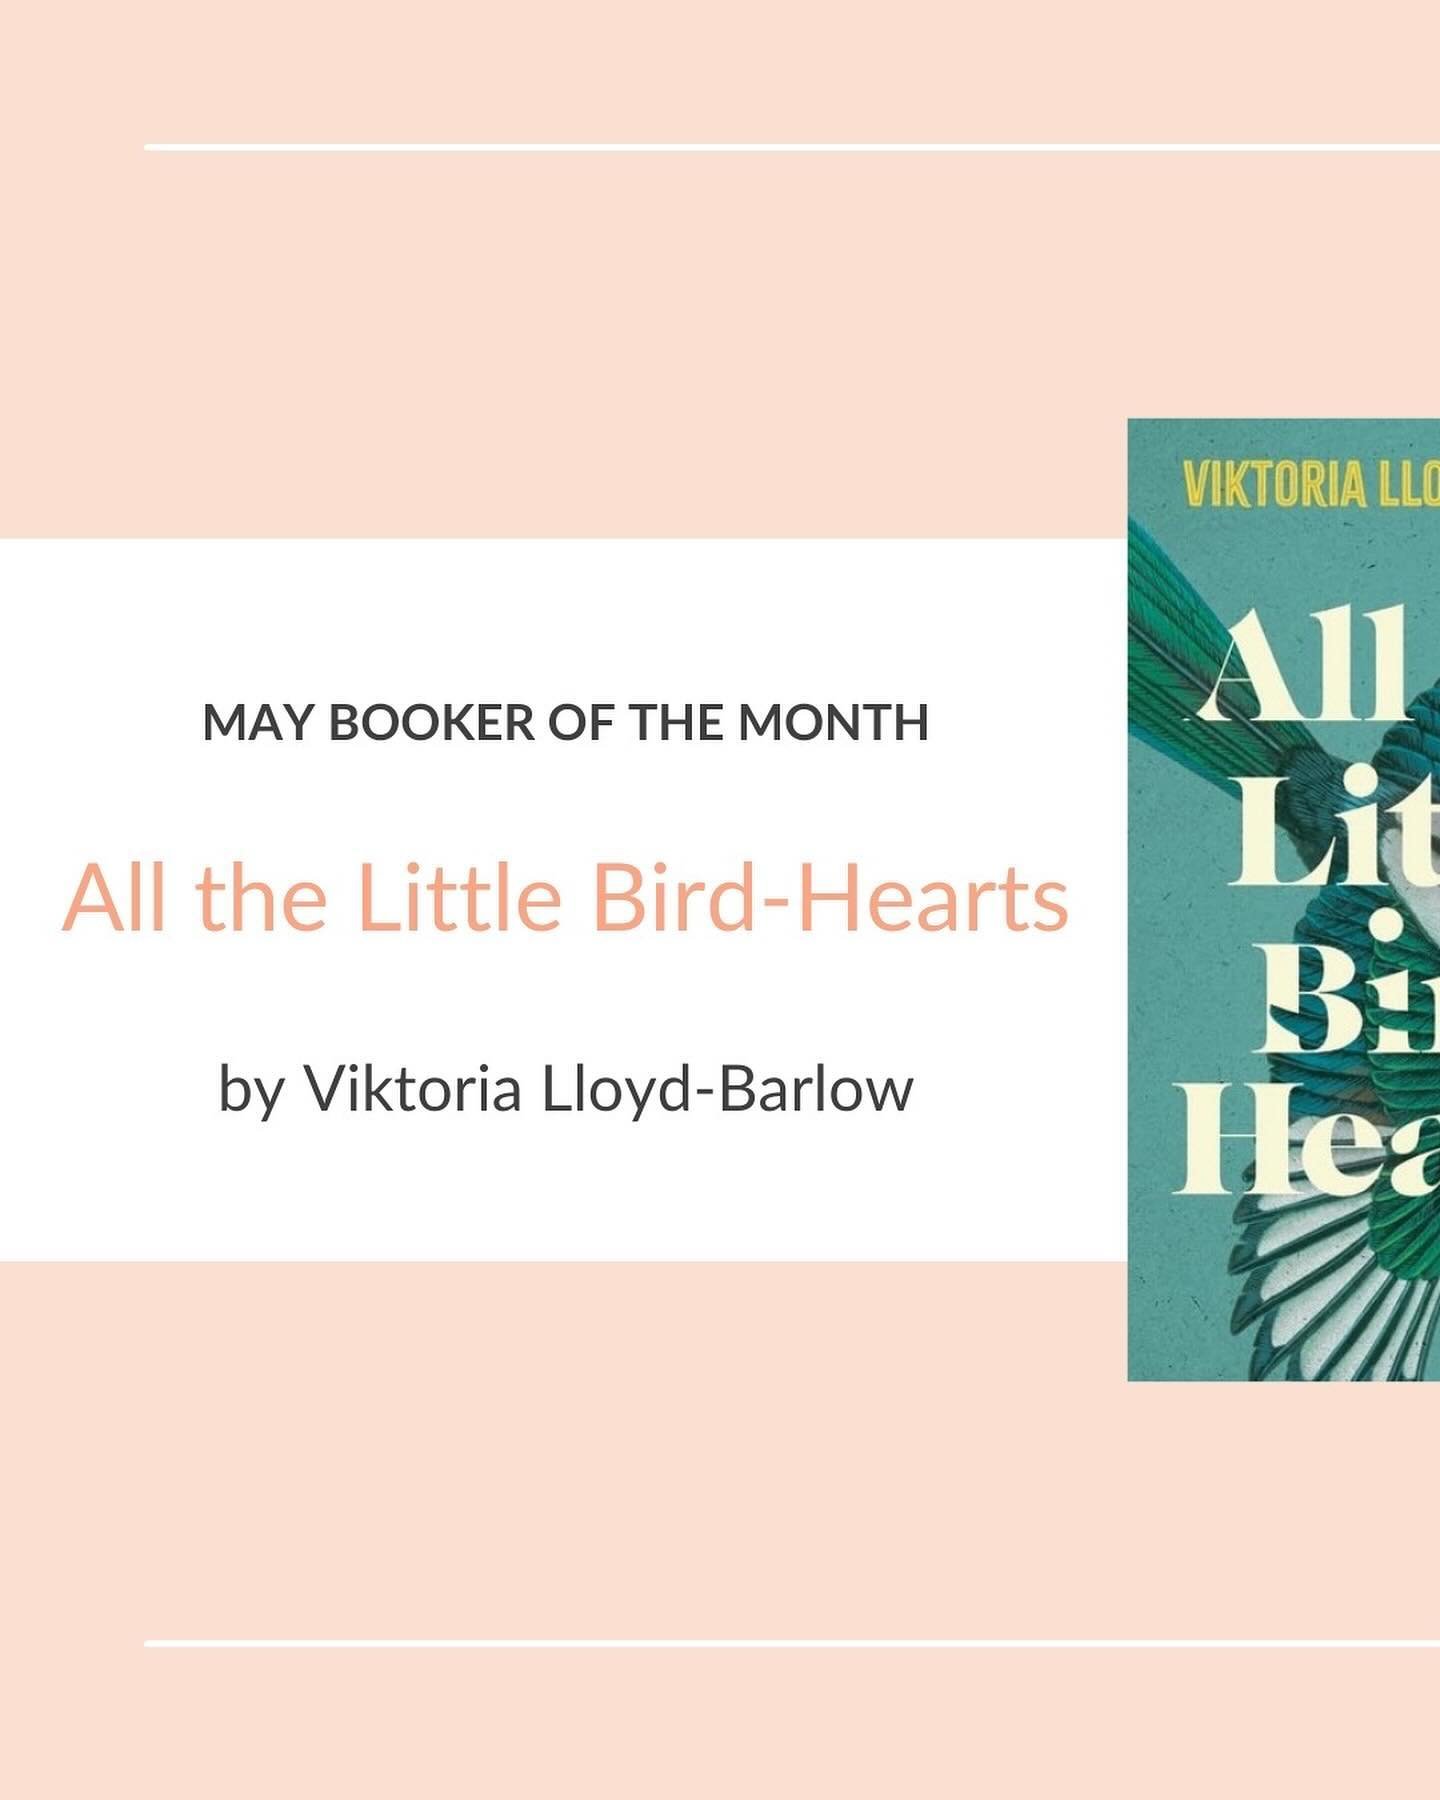 May Day, May Day, it&rsquo;s time for our next #BookerOfTheMonth! 🎉
⠀⠀⠀⠀⠀⠀⠀⠀⠀
May&rsquo;s book club pick from the Booker Prize longlist is All the Little Bird-Hearts by Viktoria Lloyd-Barlow. Swipe for the synopsis. I&rsquo;m eager to read this one 